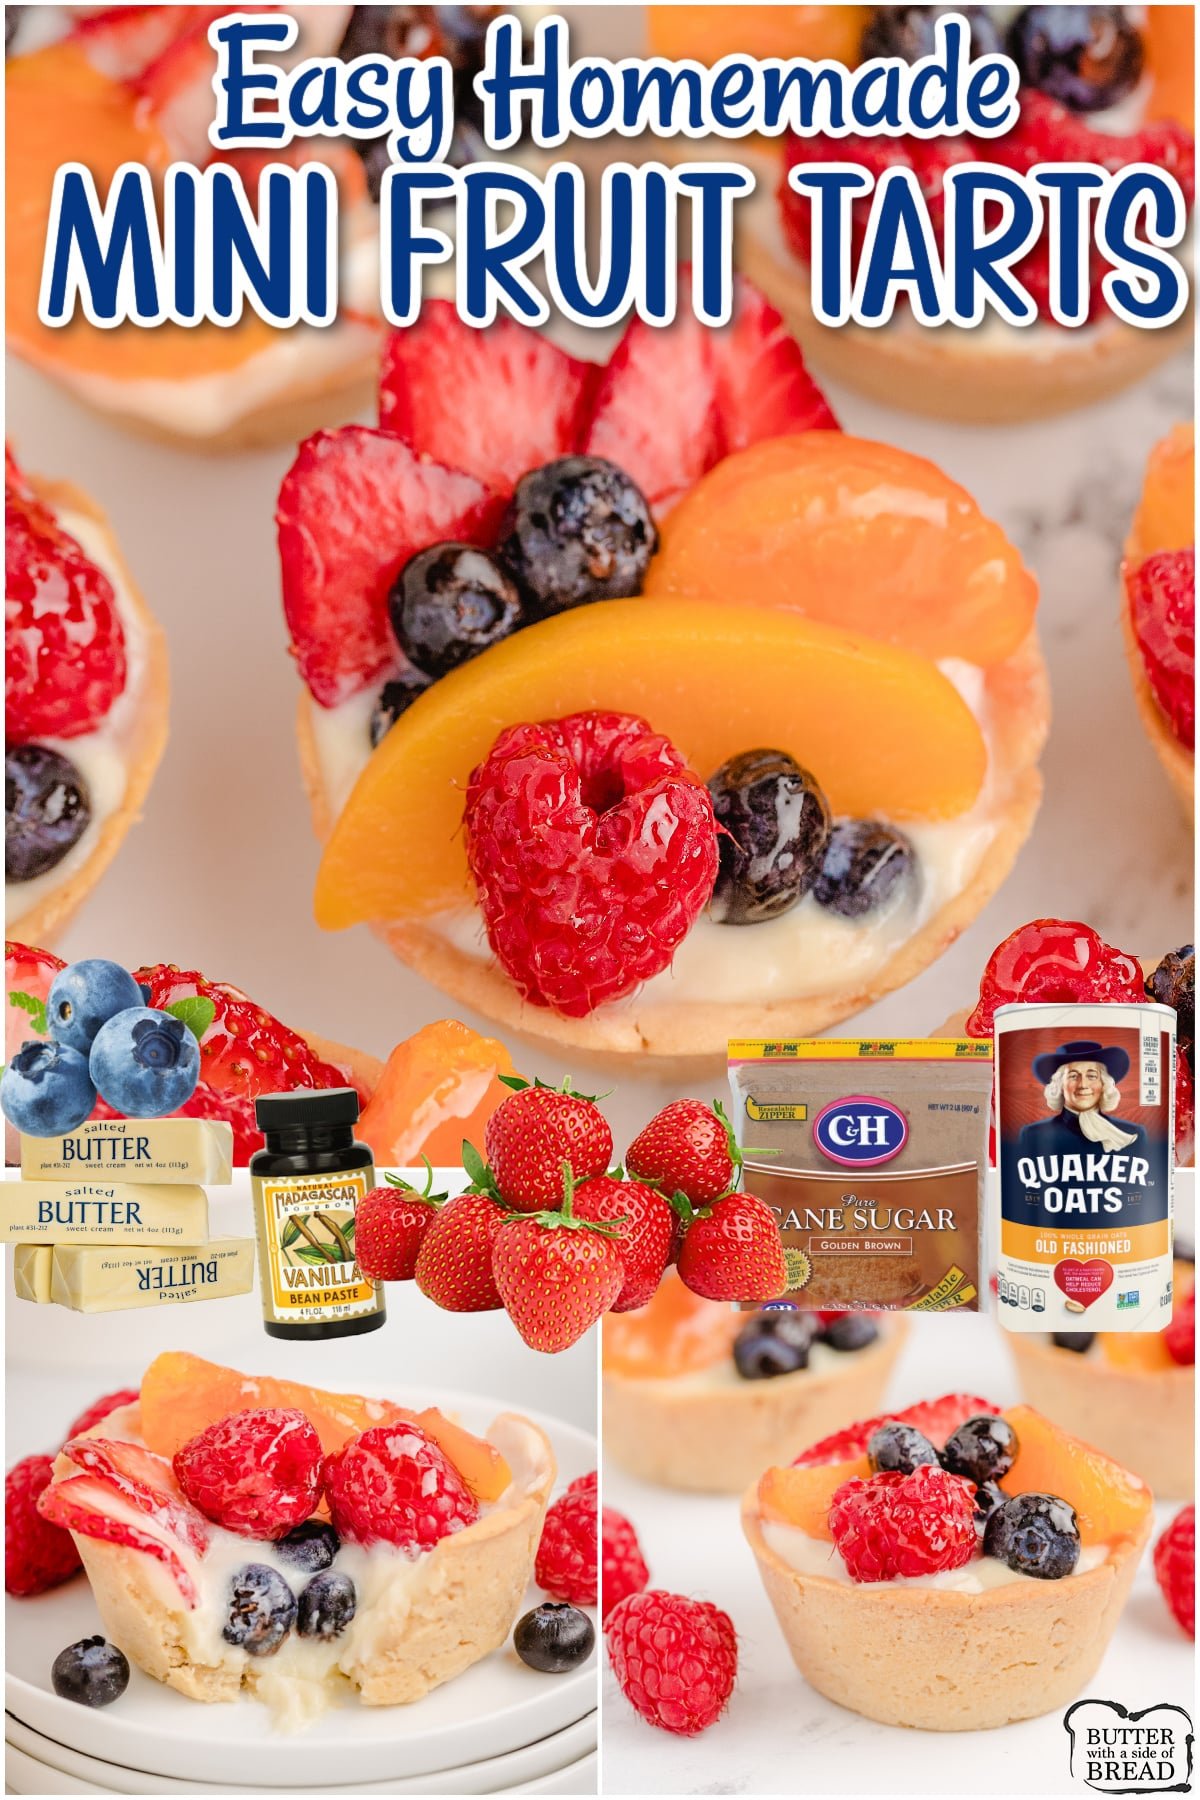 Mini Fresh Fruit Tarts made with a homemade brown sugar oat tart shell, topped with sweet cream and fresh fruit and berries! Lovely dessert with fabulous fresh flavors everyone enjoys!